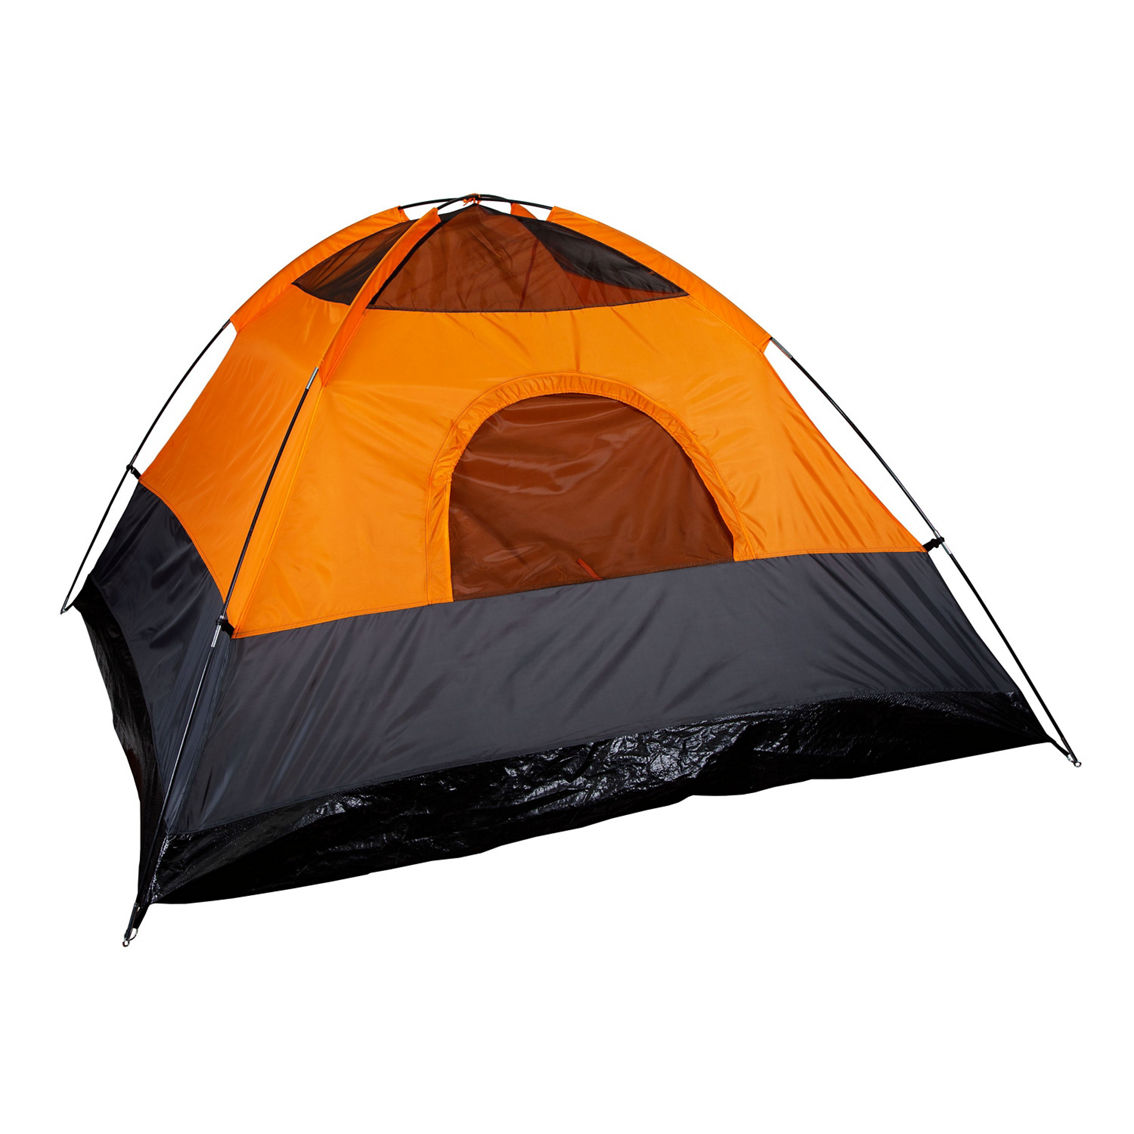 Stansport Appalachian Dome Tent - Image 3 of 5